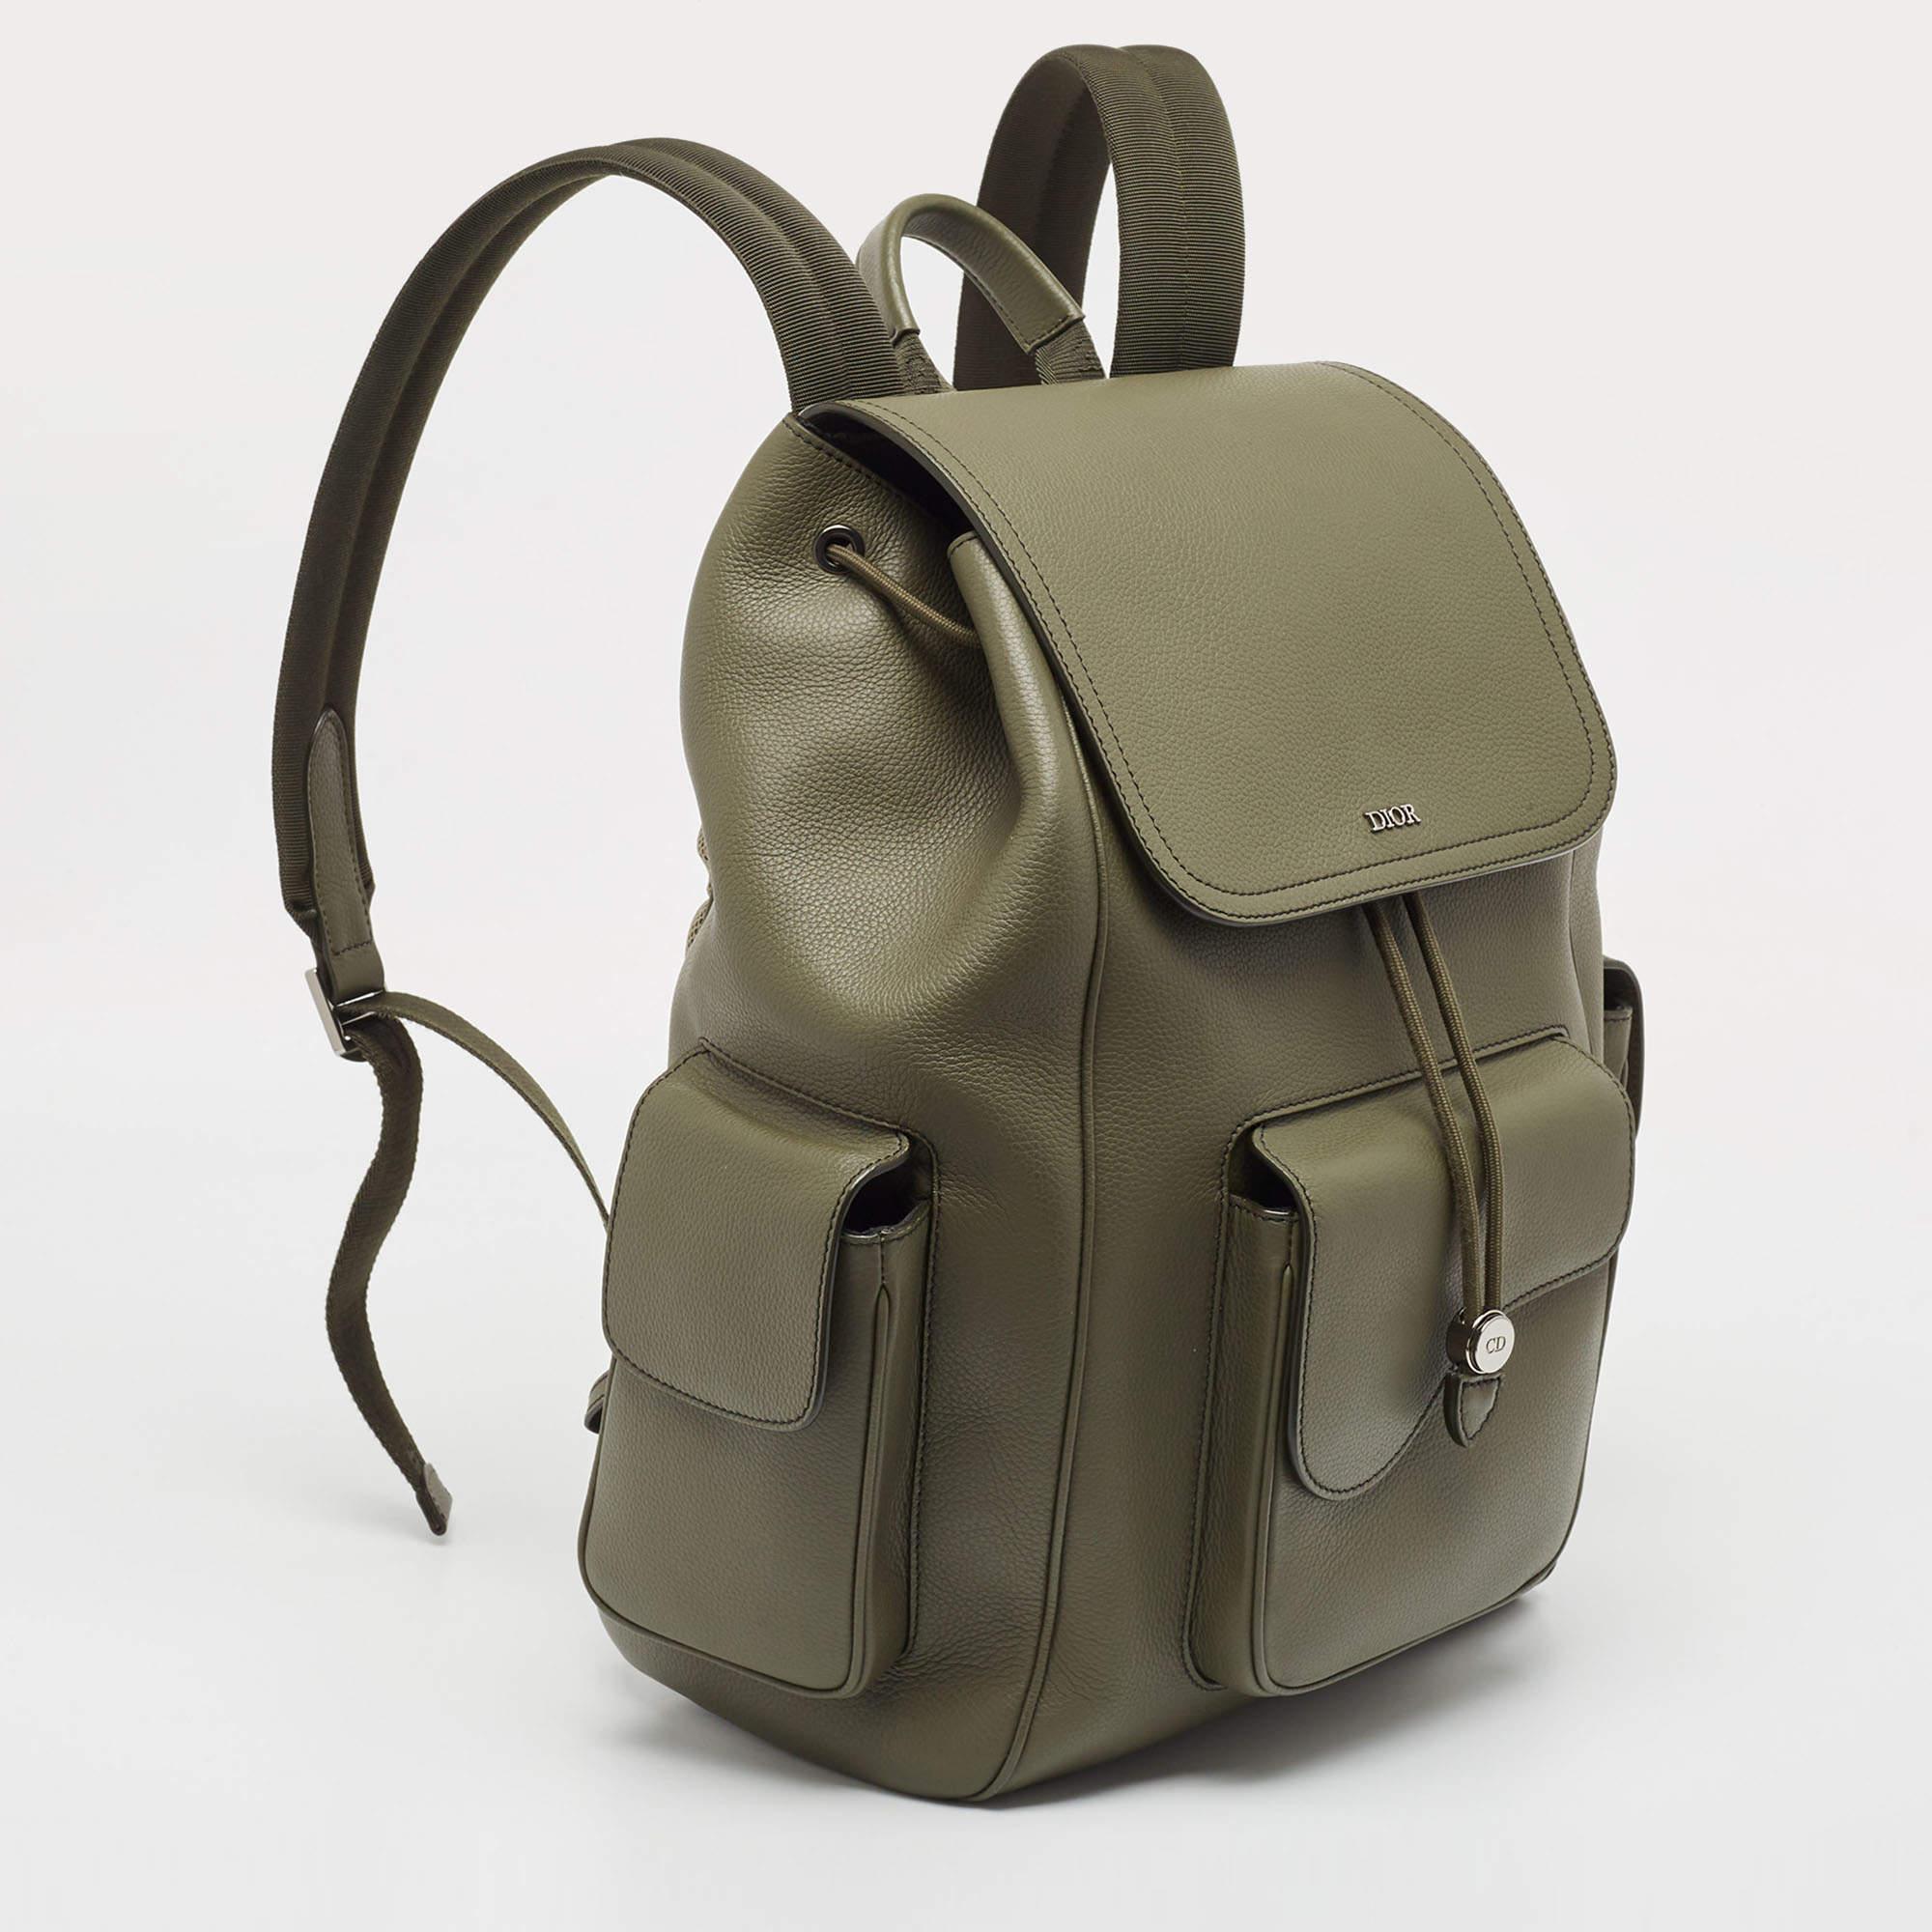 Dior Fatigue Green Leather Saddle Backpack 2